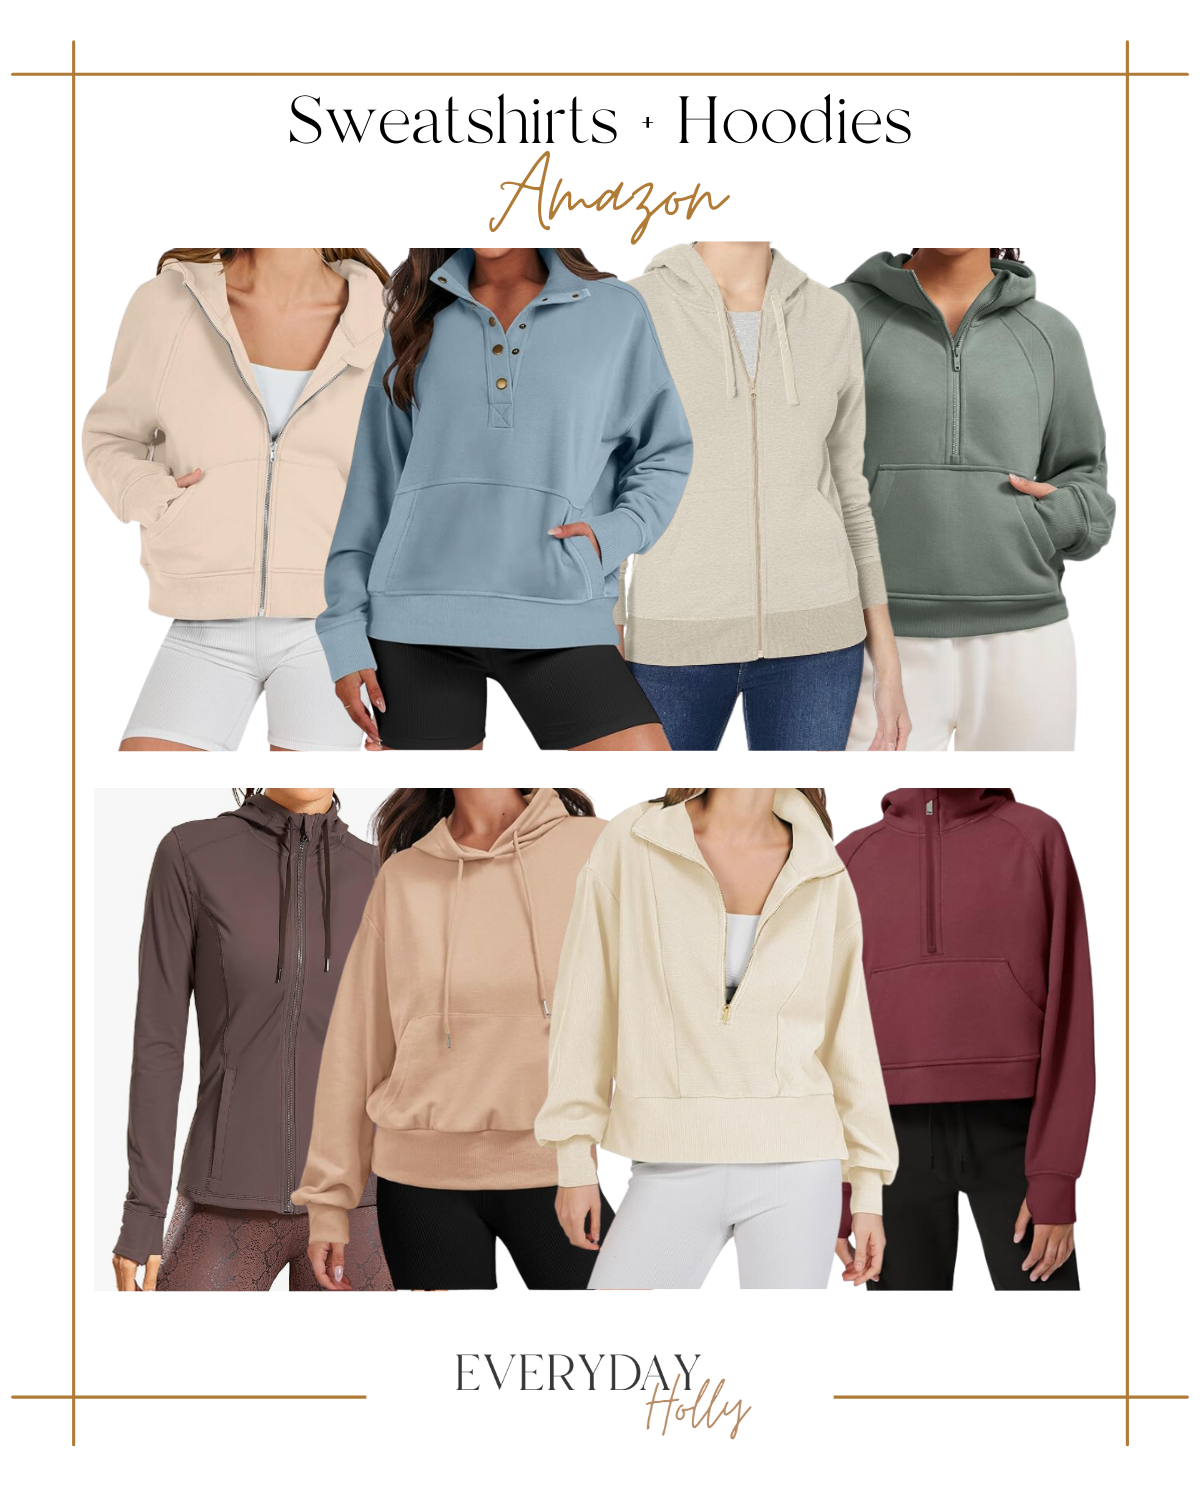 trendy and comfy athleisure styles that you need | #trendy #comfy #athleisure #athletic #sweatshirts #hoodies #jackets #quarterzip #zipup #neutral #workout